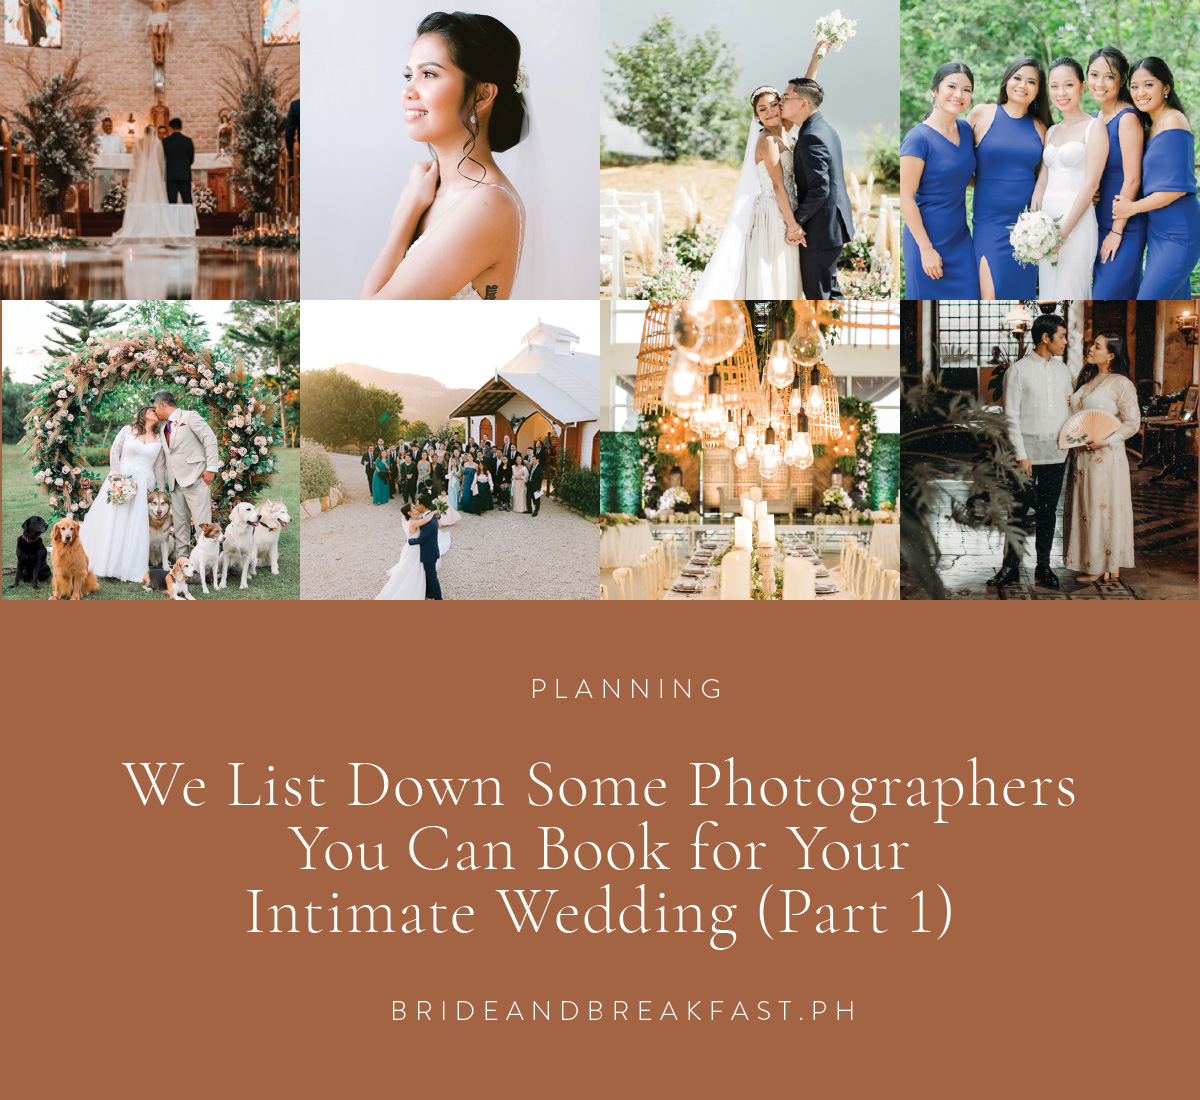 We List Down Some Photographers You Can Book for Your Intimate Wedding (Part 1)